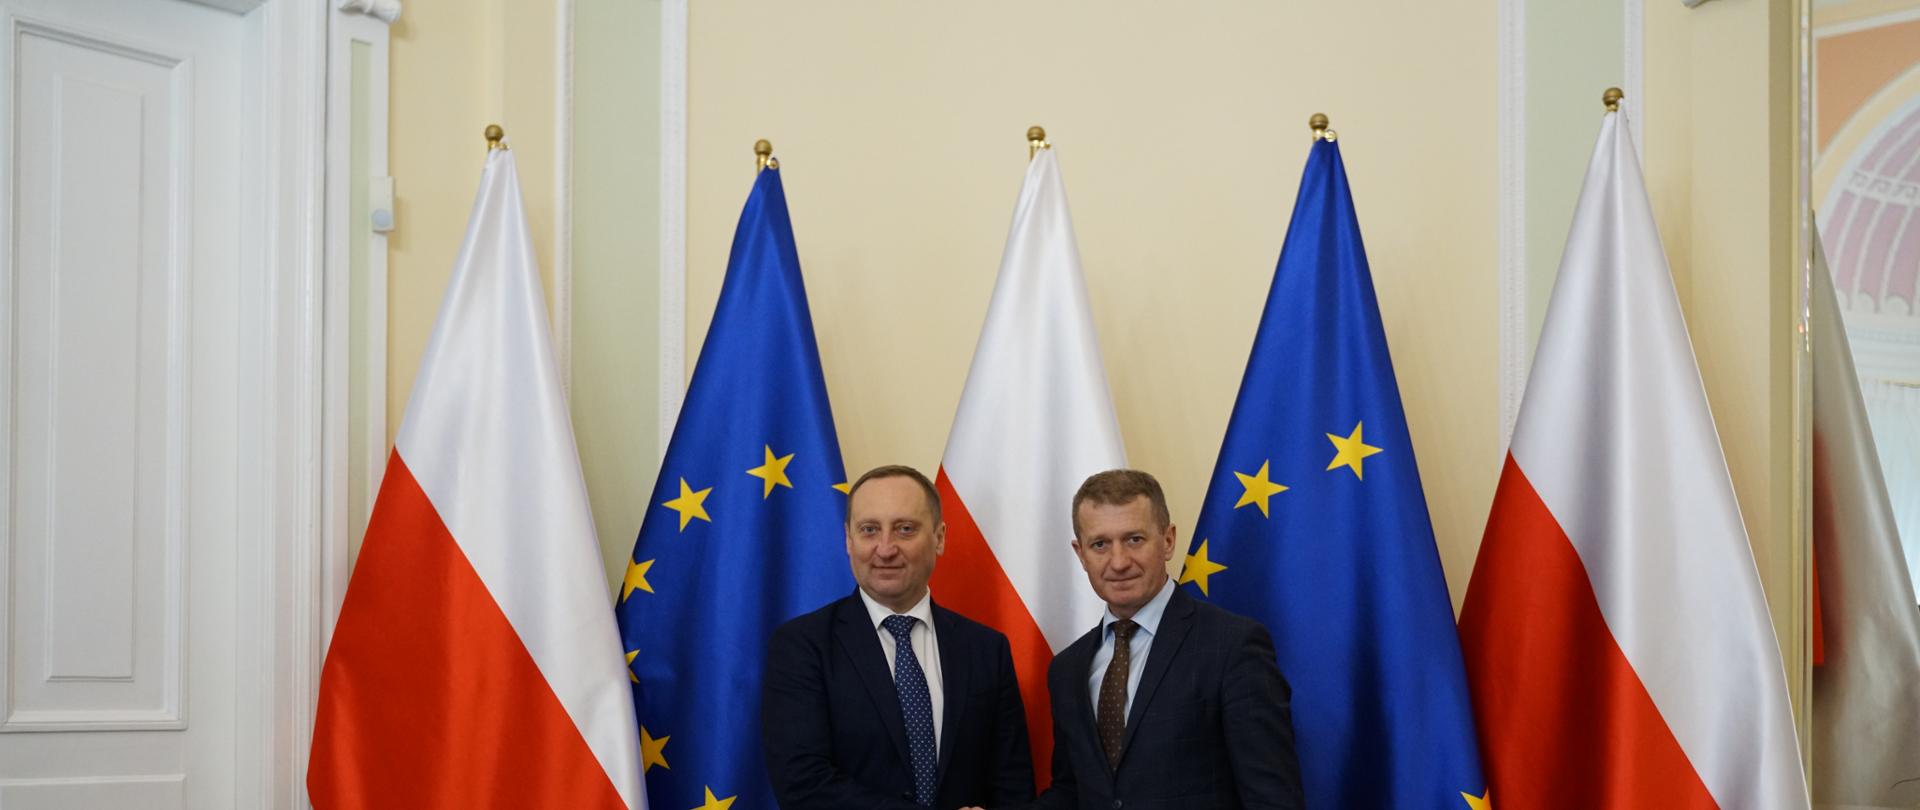 two men shaking hands with the flags of Poland and European Union in the background